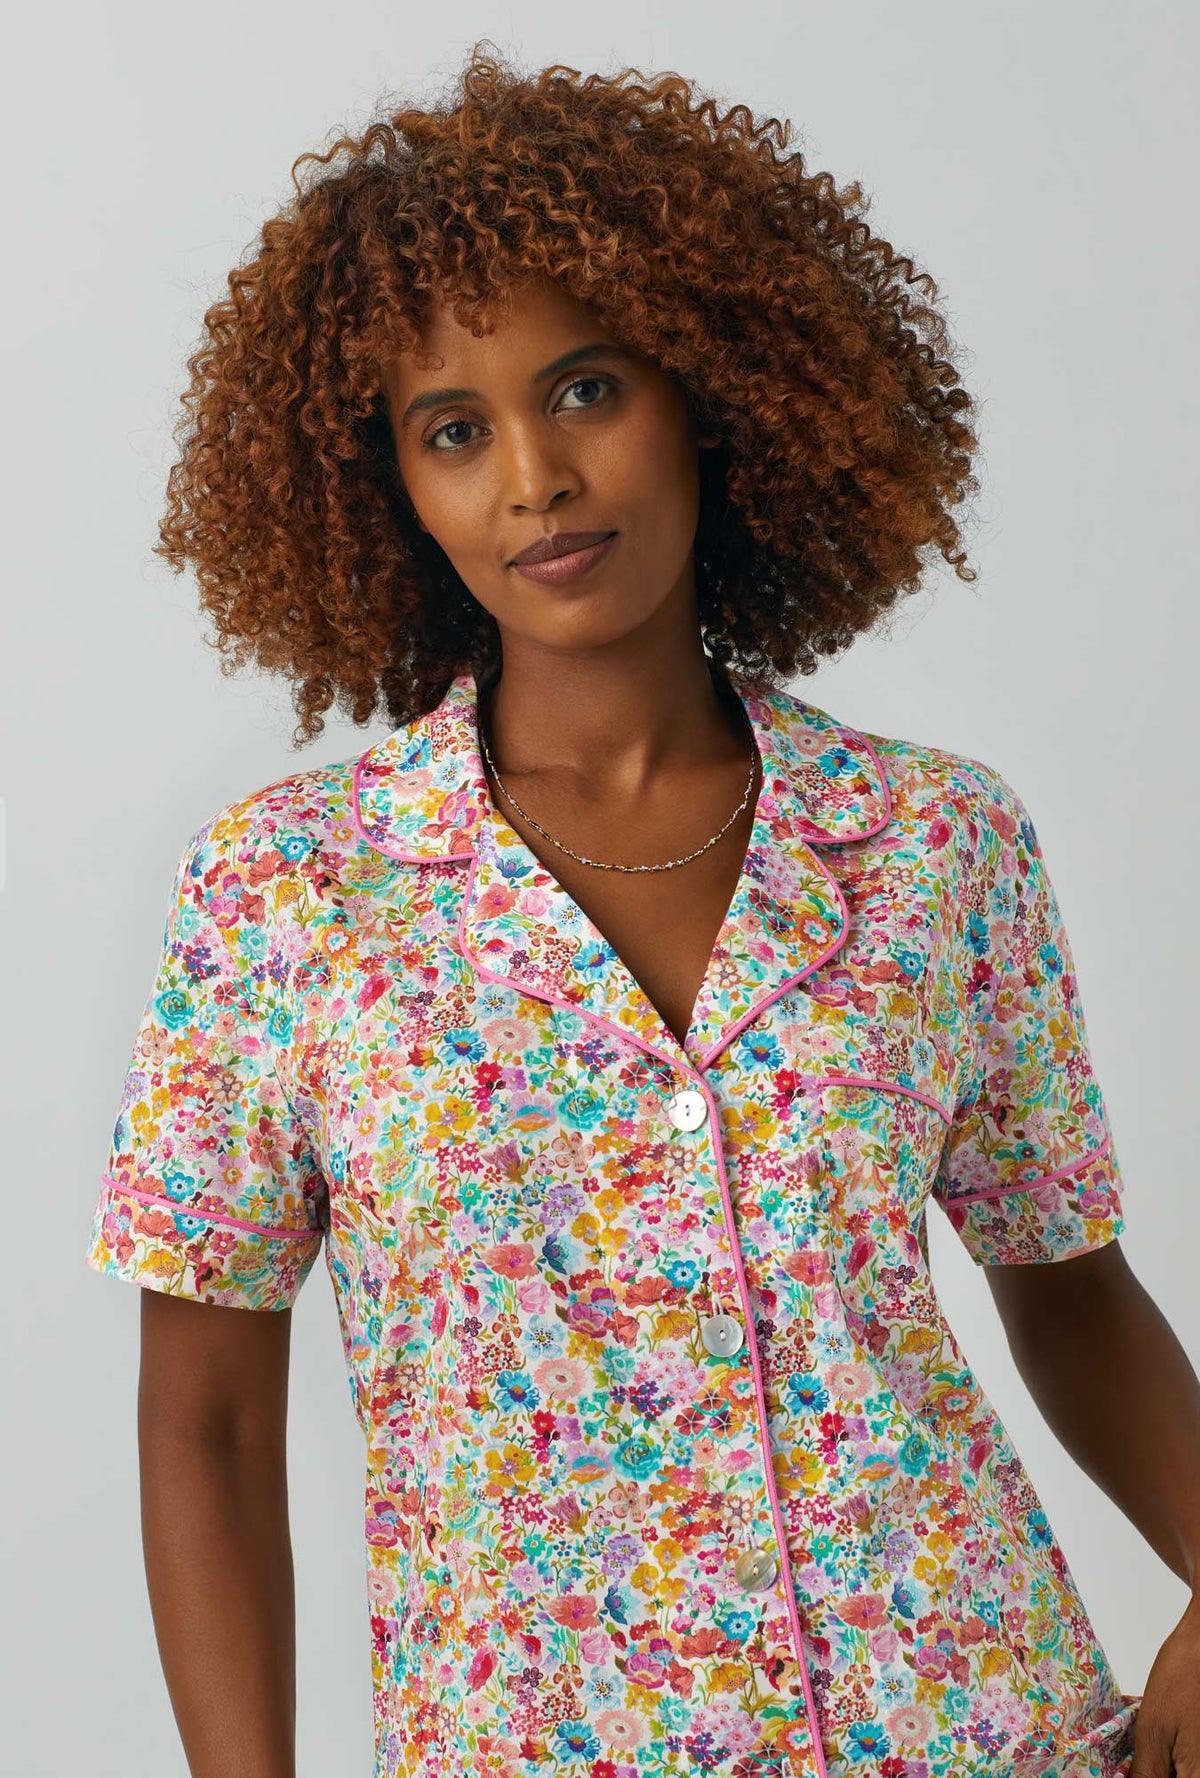 A lady wearing  multi color short Sleeve Classic Woven Cotton PJ Set with Classic Meadow print